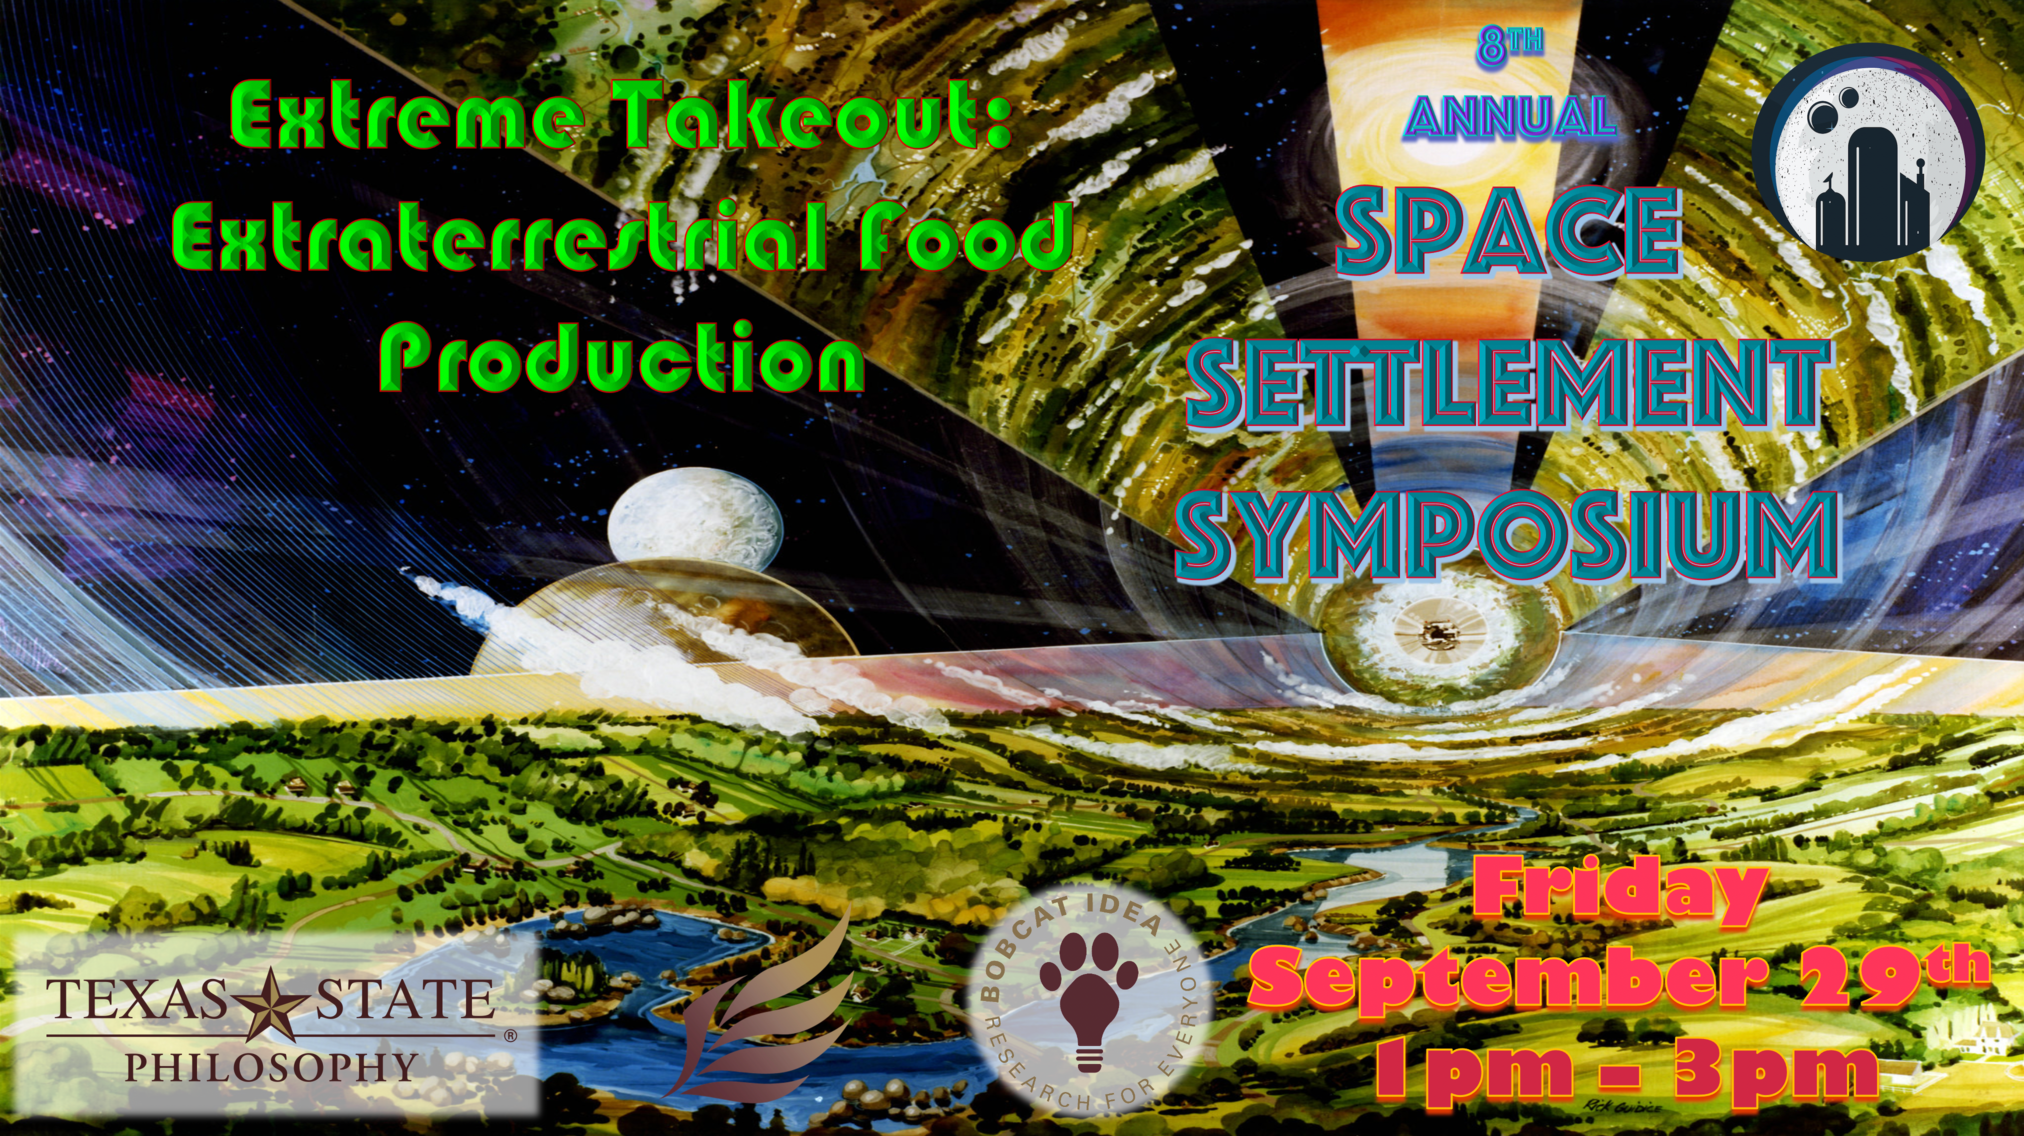 8th Annual Space Settlement Symposium flyer